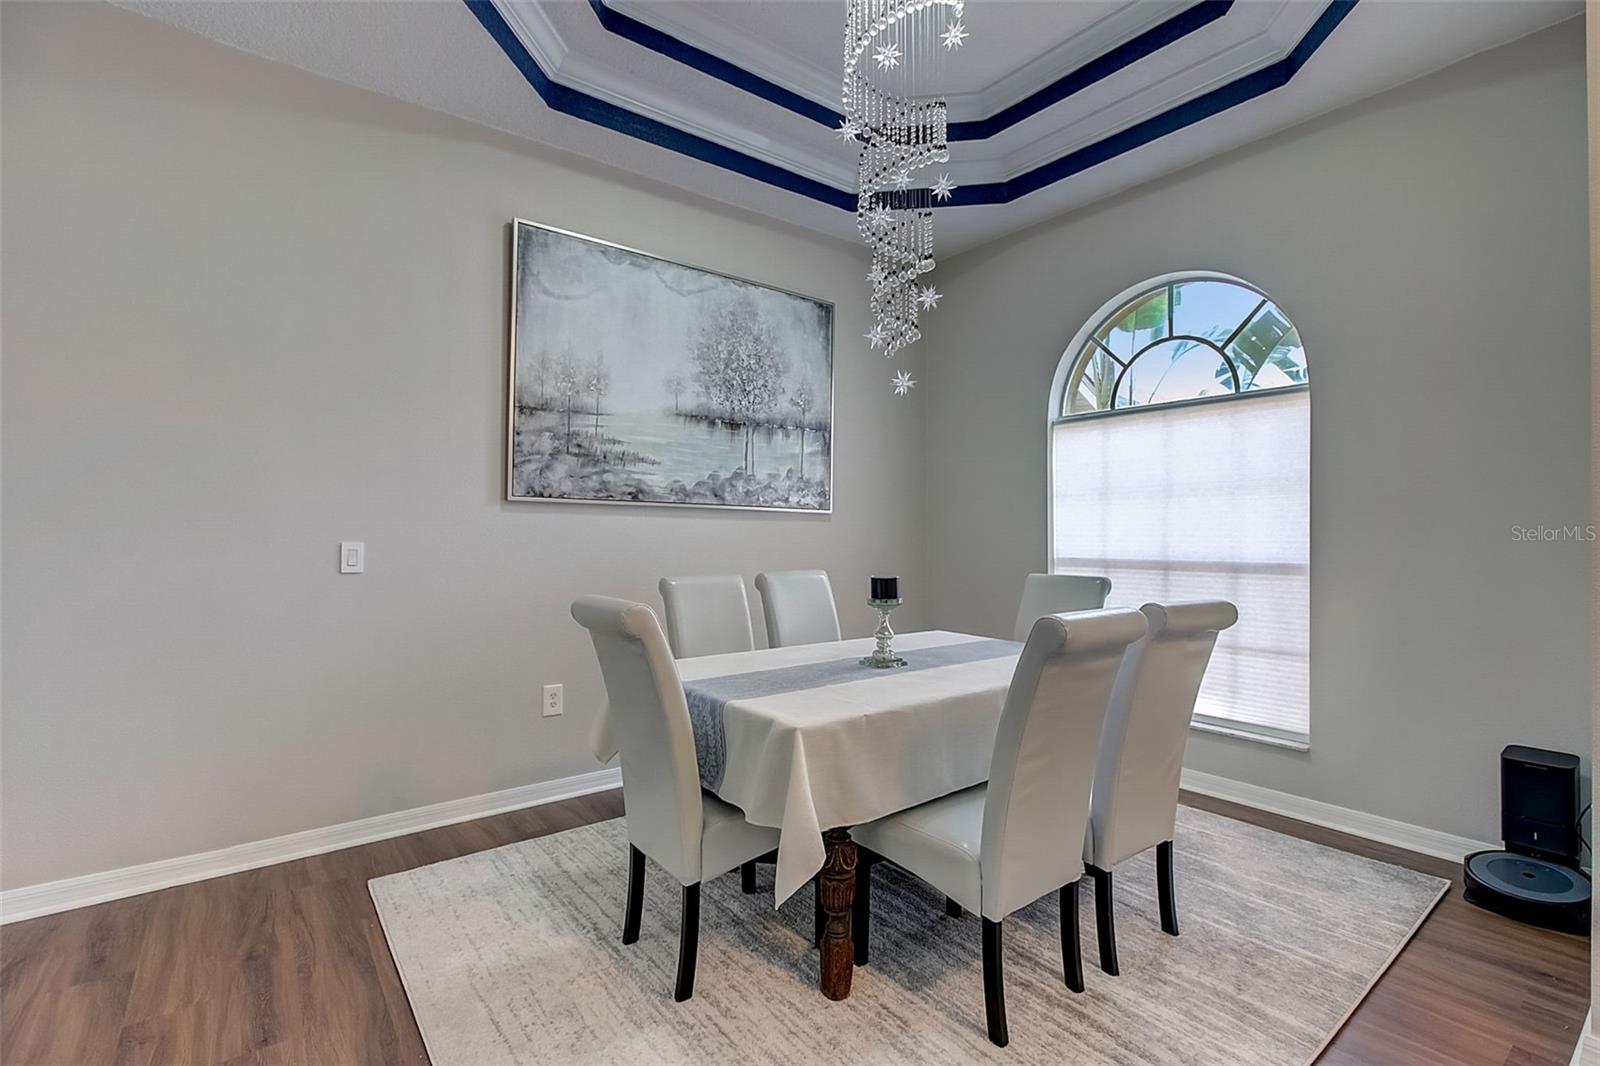 Formal Dining area with gorgeous light fixture and multi- level tray ceiling and crown molding